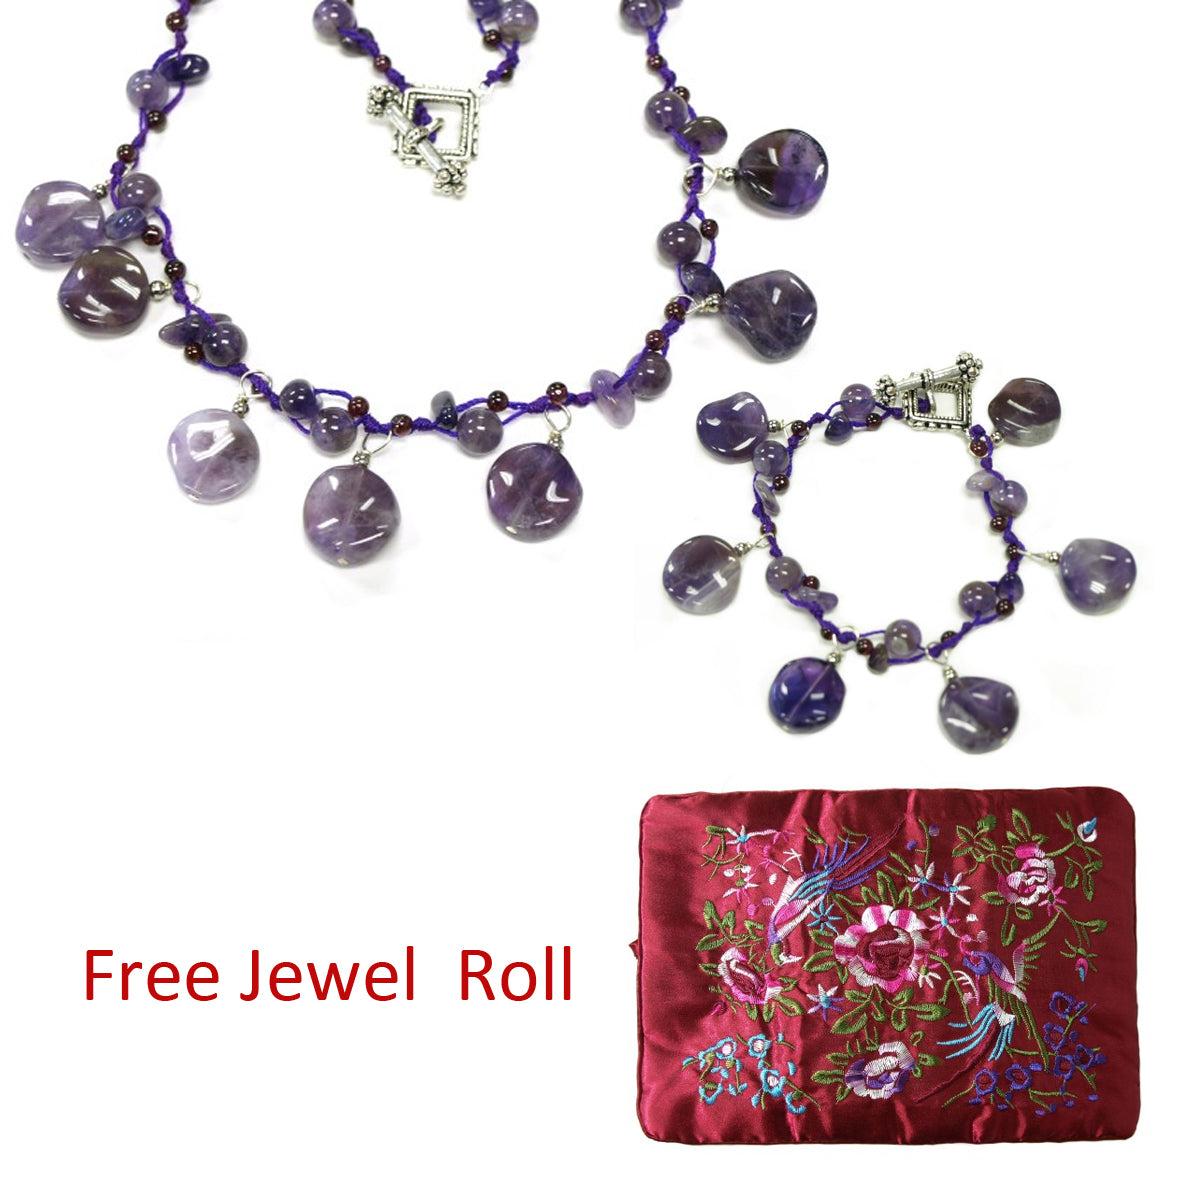 Purple Quartz Necklace and Bracelet Jewelry Set + Large Burgundy Silk Embroidered Jewelry Roll